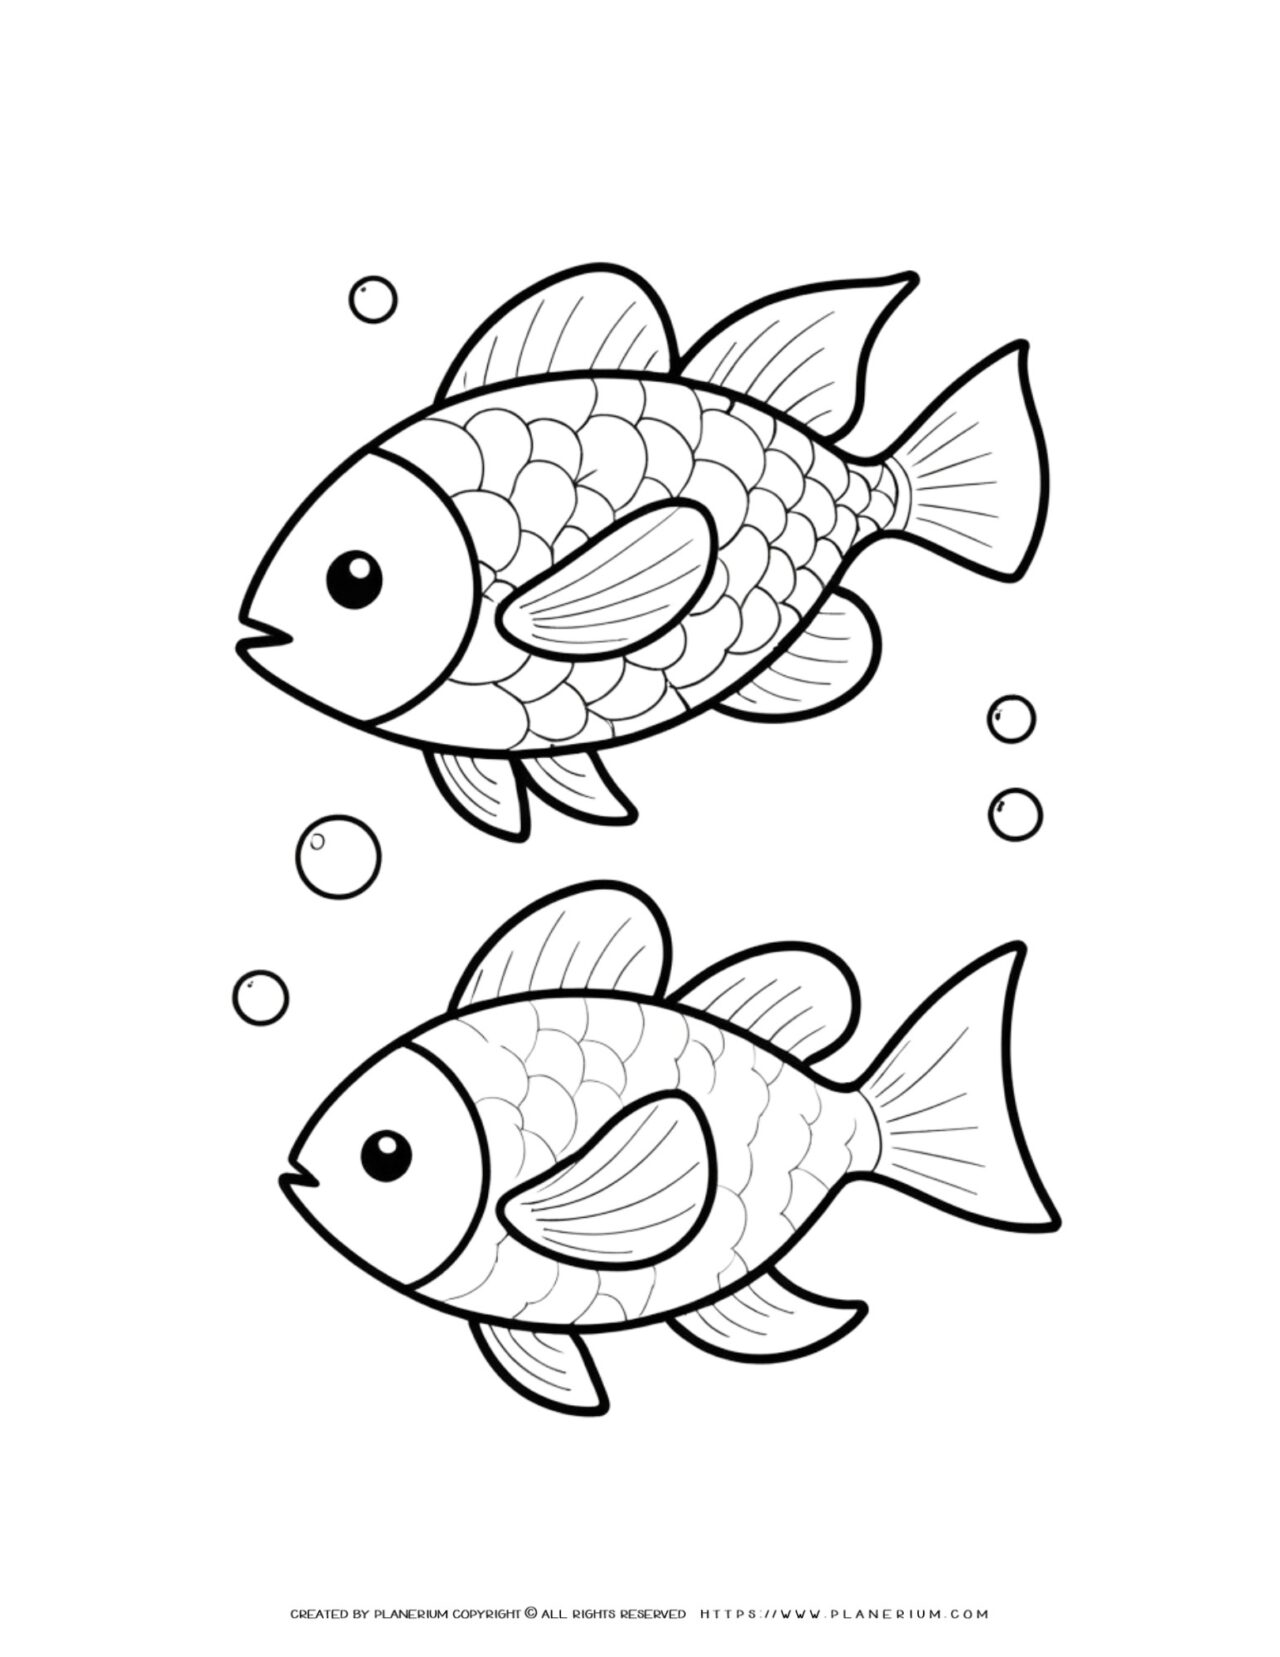 Two-cartoon-fish-coloring-page-illustration